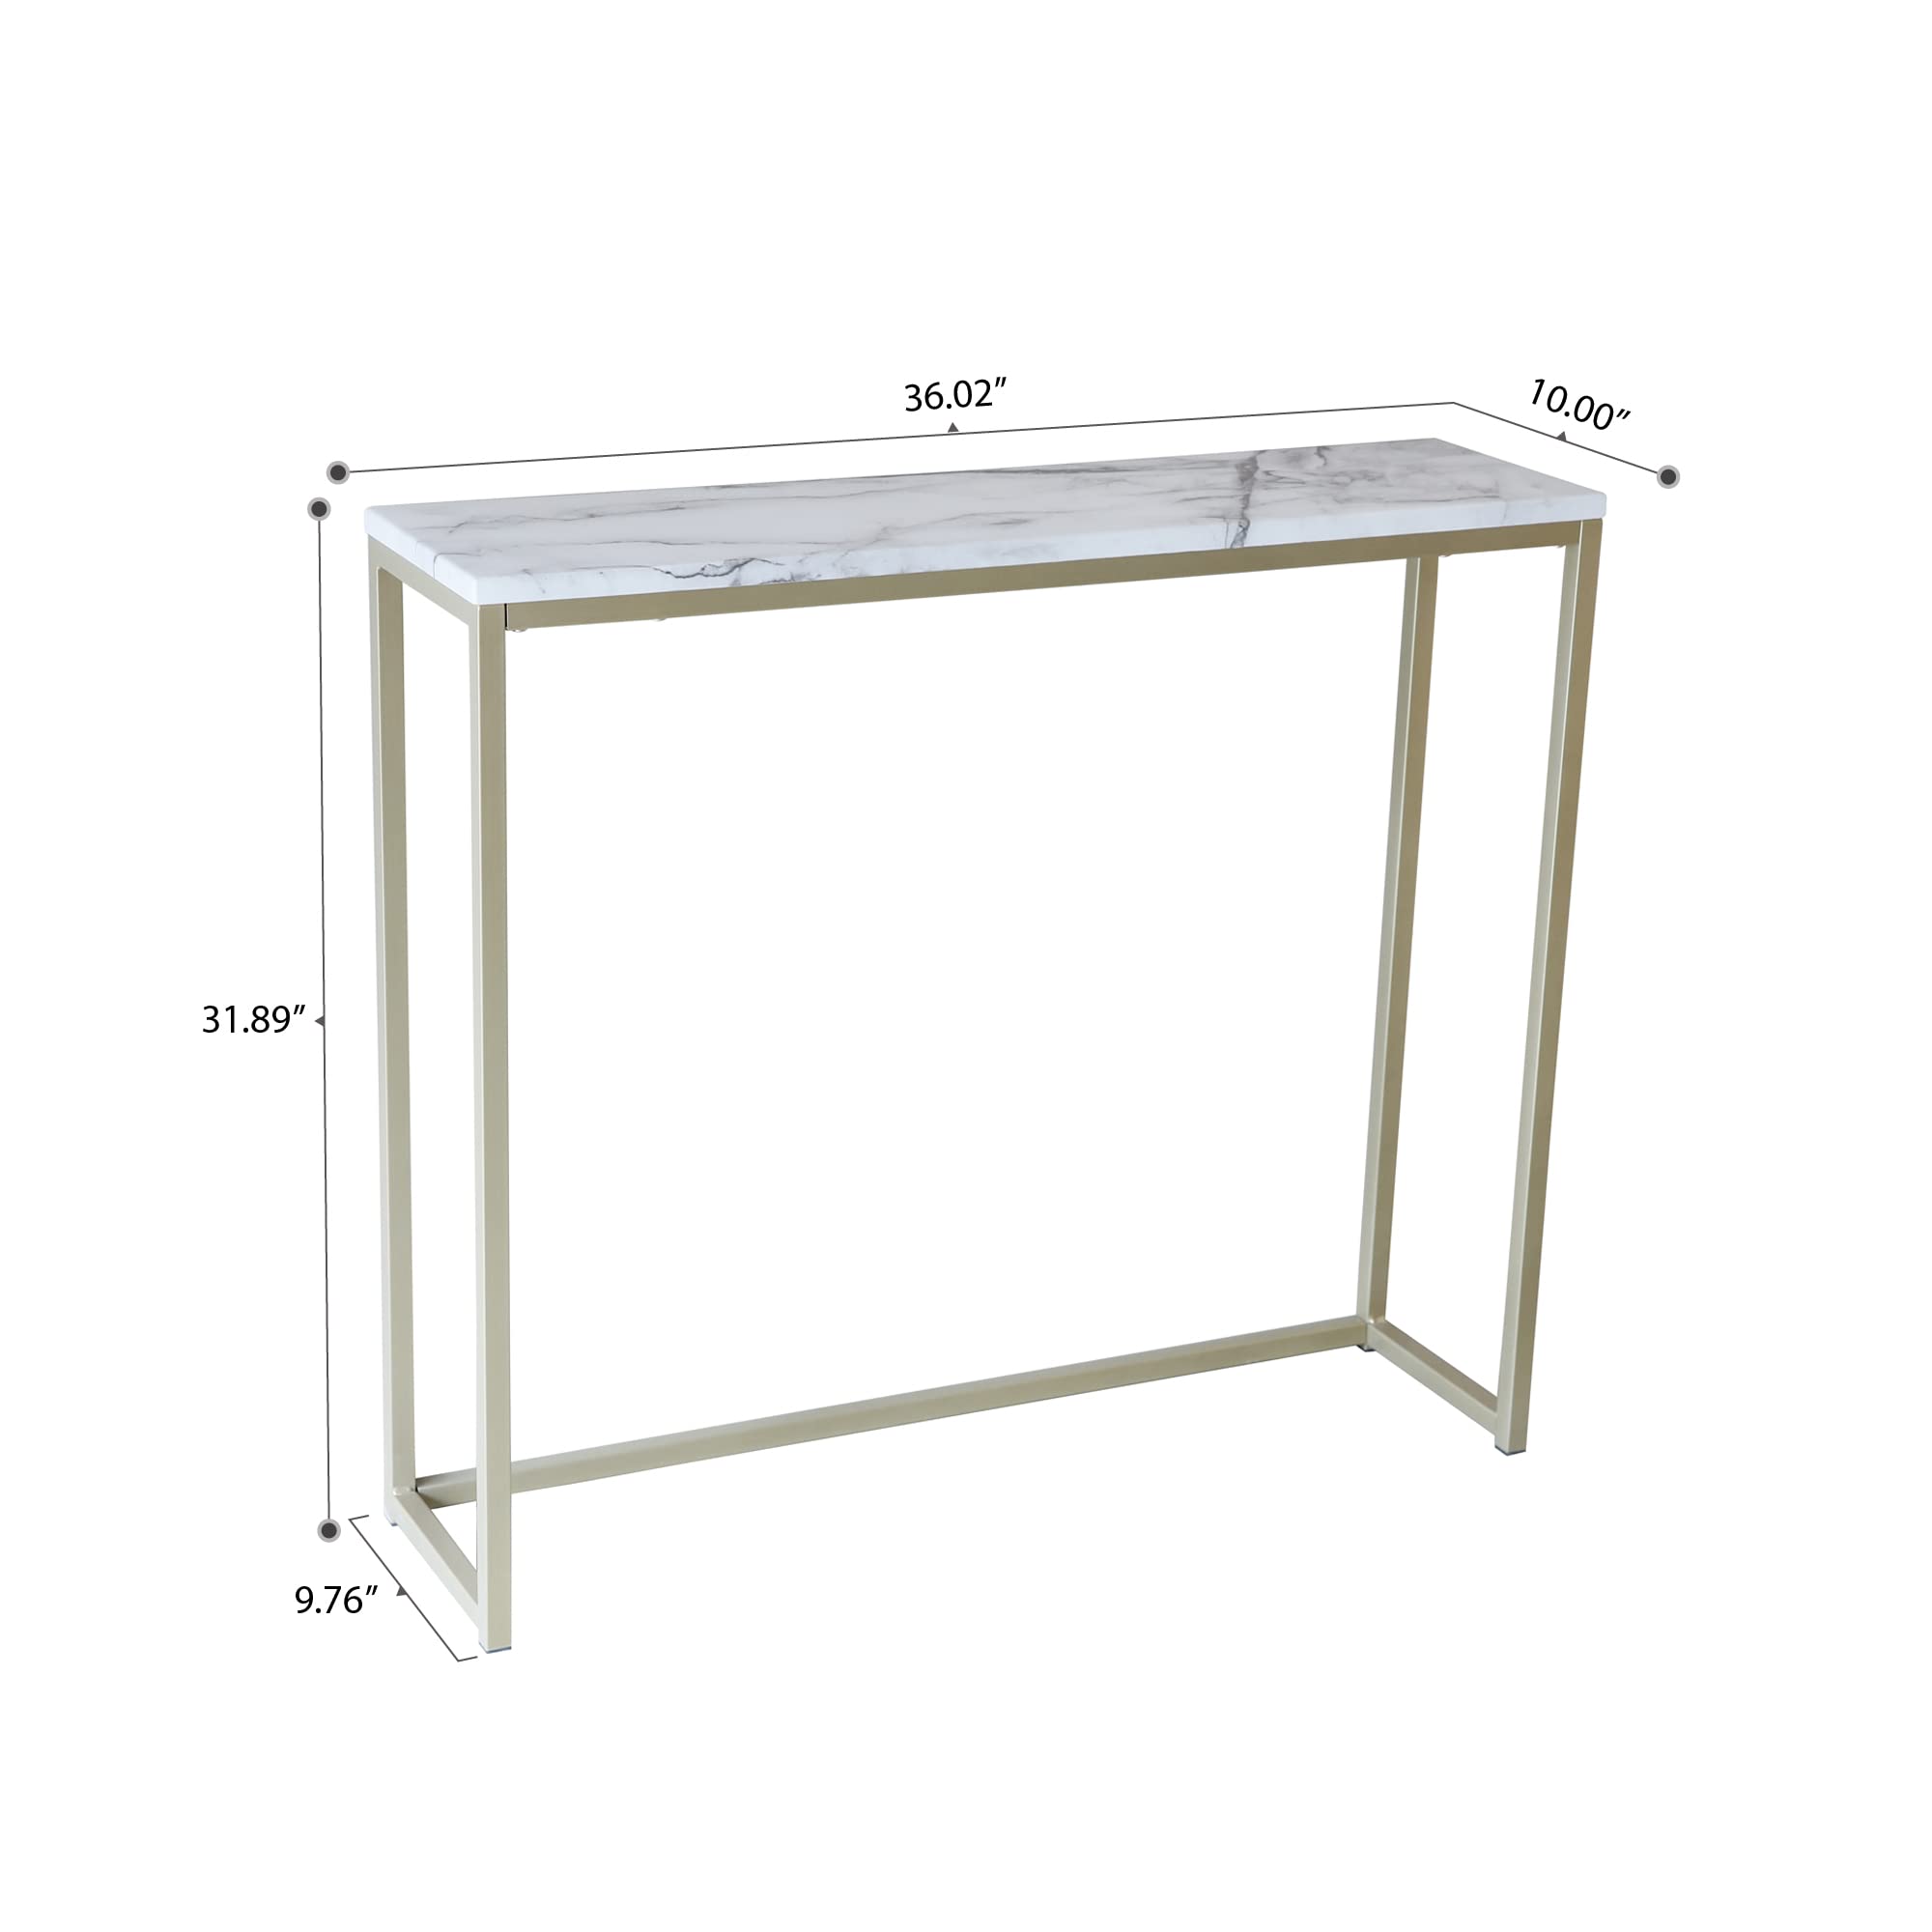 Tilly Lin 36" Faux Marble Console Table with Gold Metal Frame, Rectangular Shape Sofa Table for Entryway, Bar Table for Dining Room, Couch Table, Display Table for Living Room, Hallway, Foyer